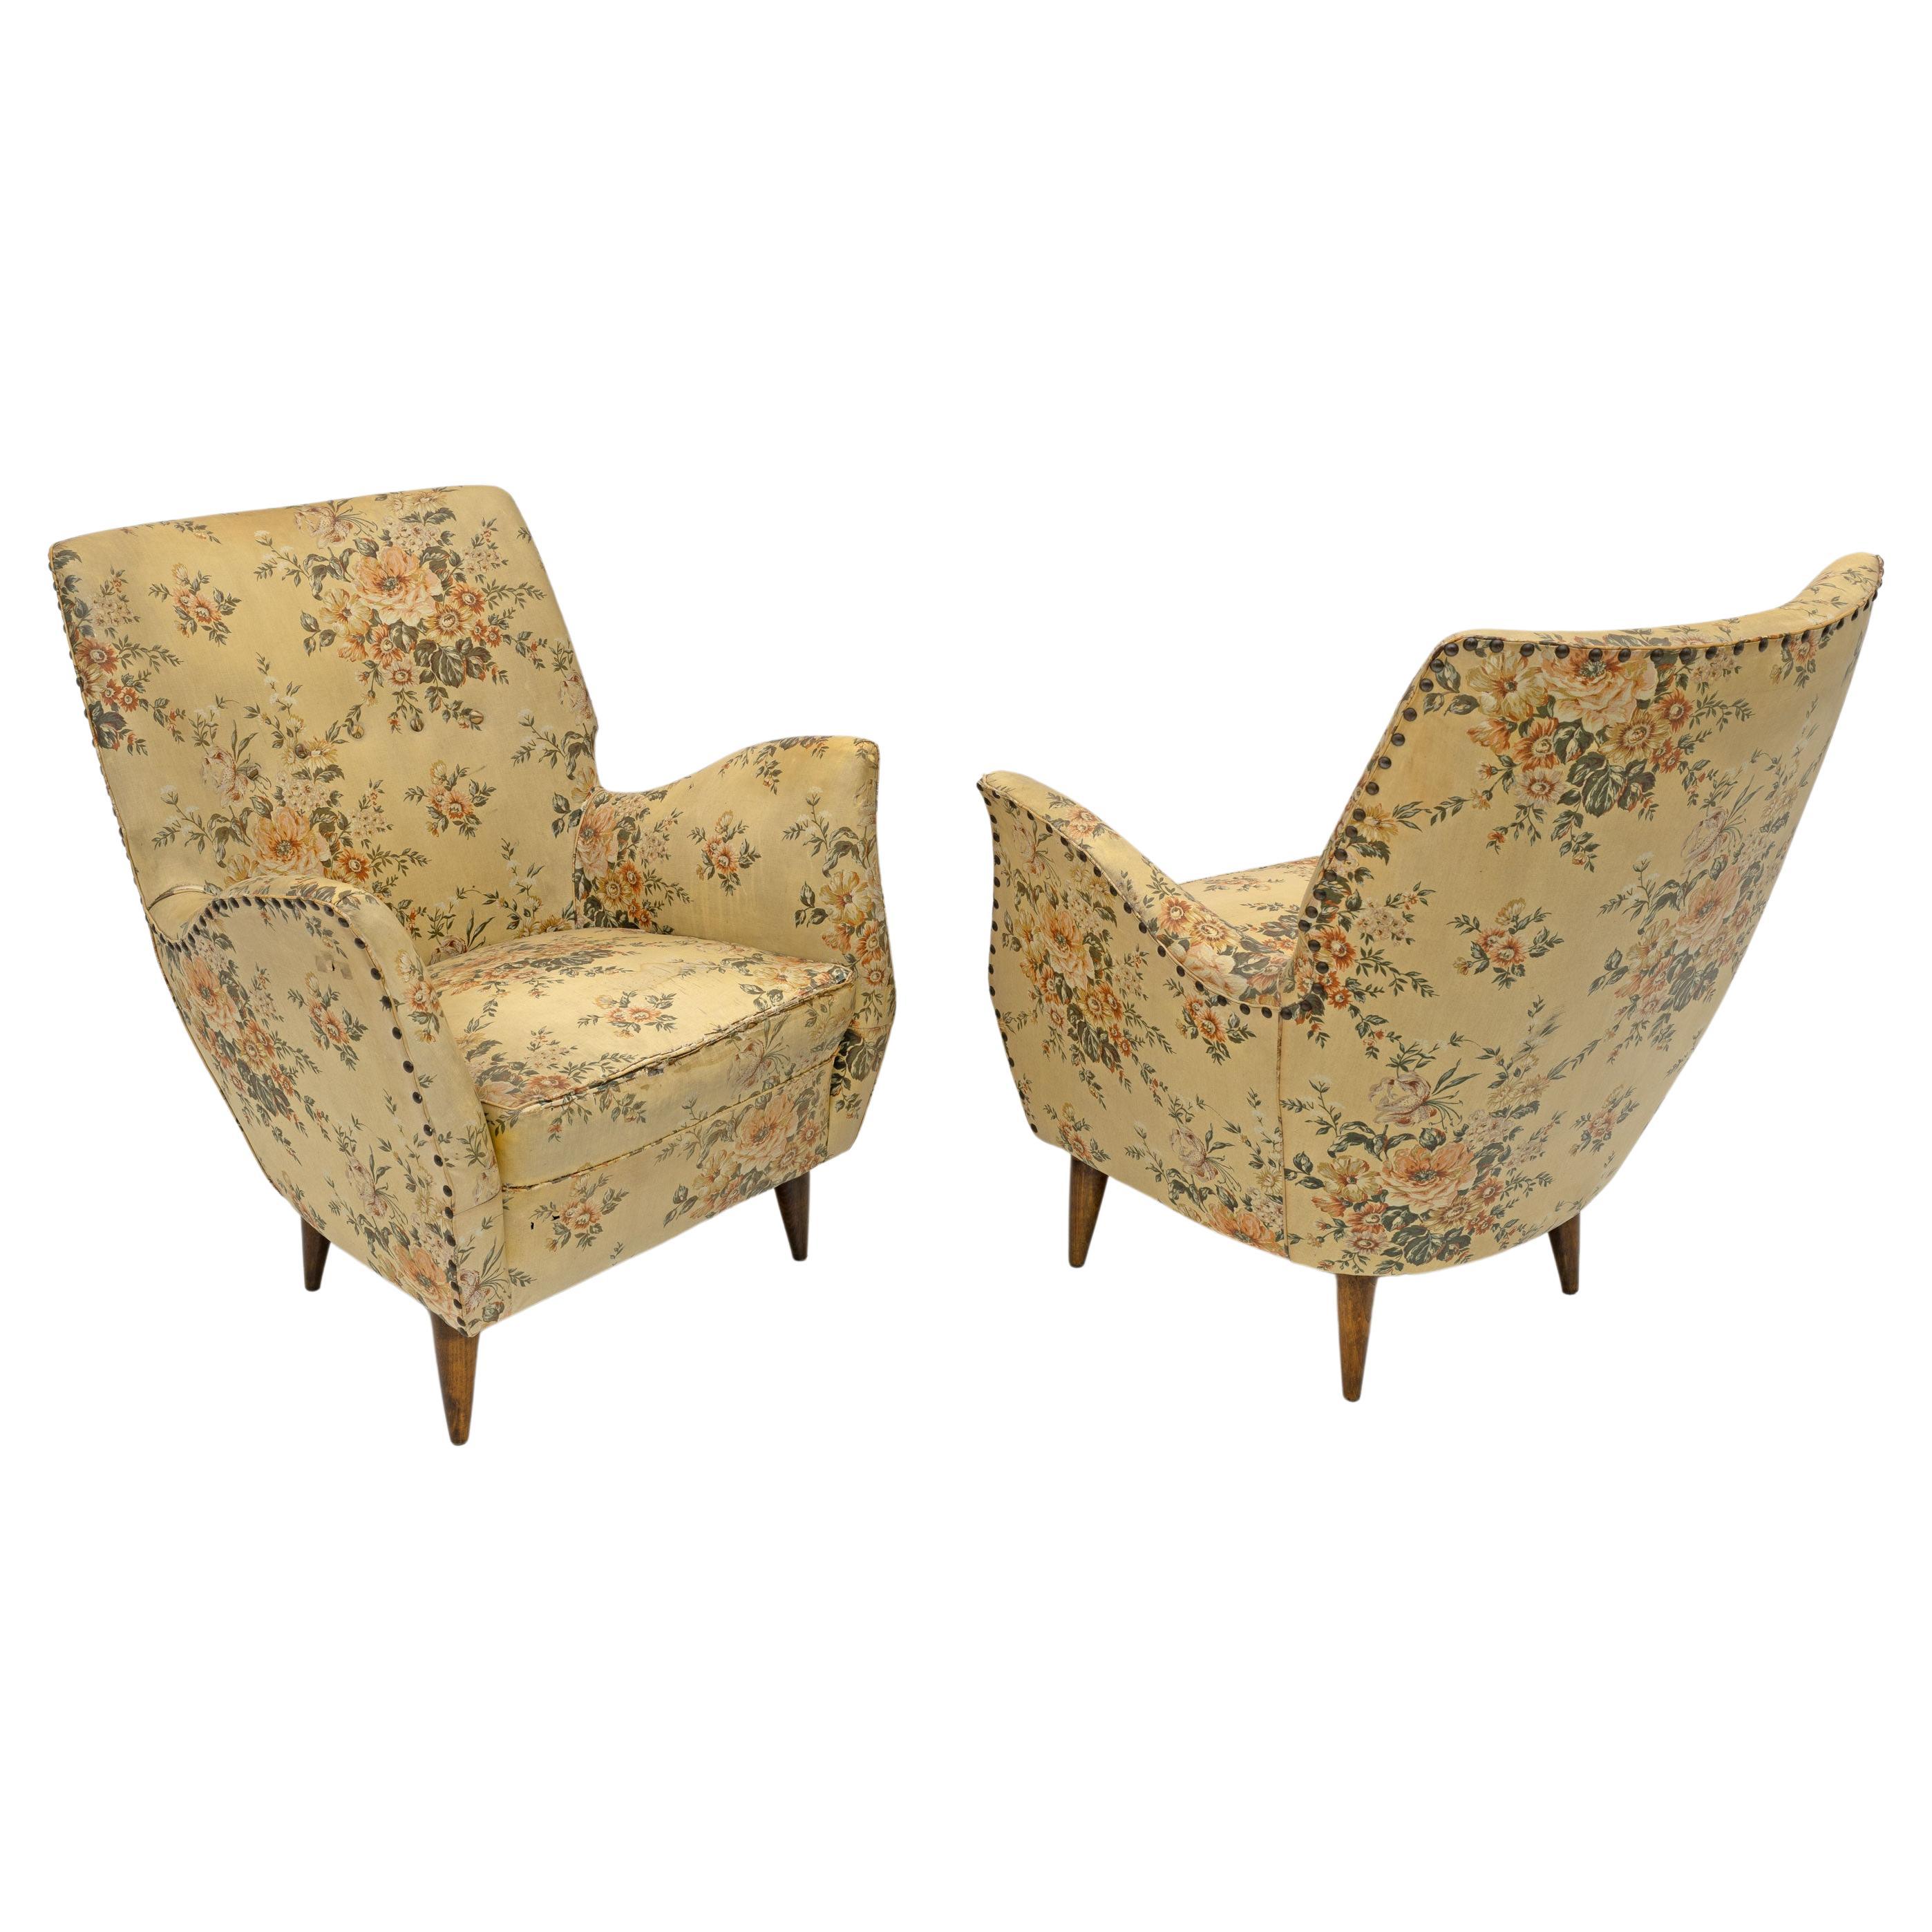 Attributed to Gio Ponti Mid-Century Modern Italian Armchairs by ISA, 1950s, Pair For Sale